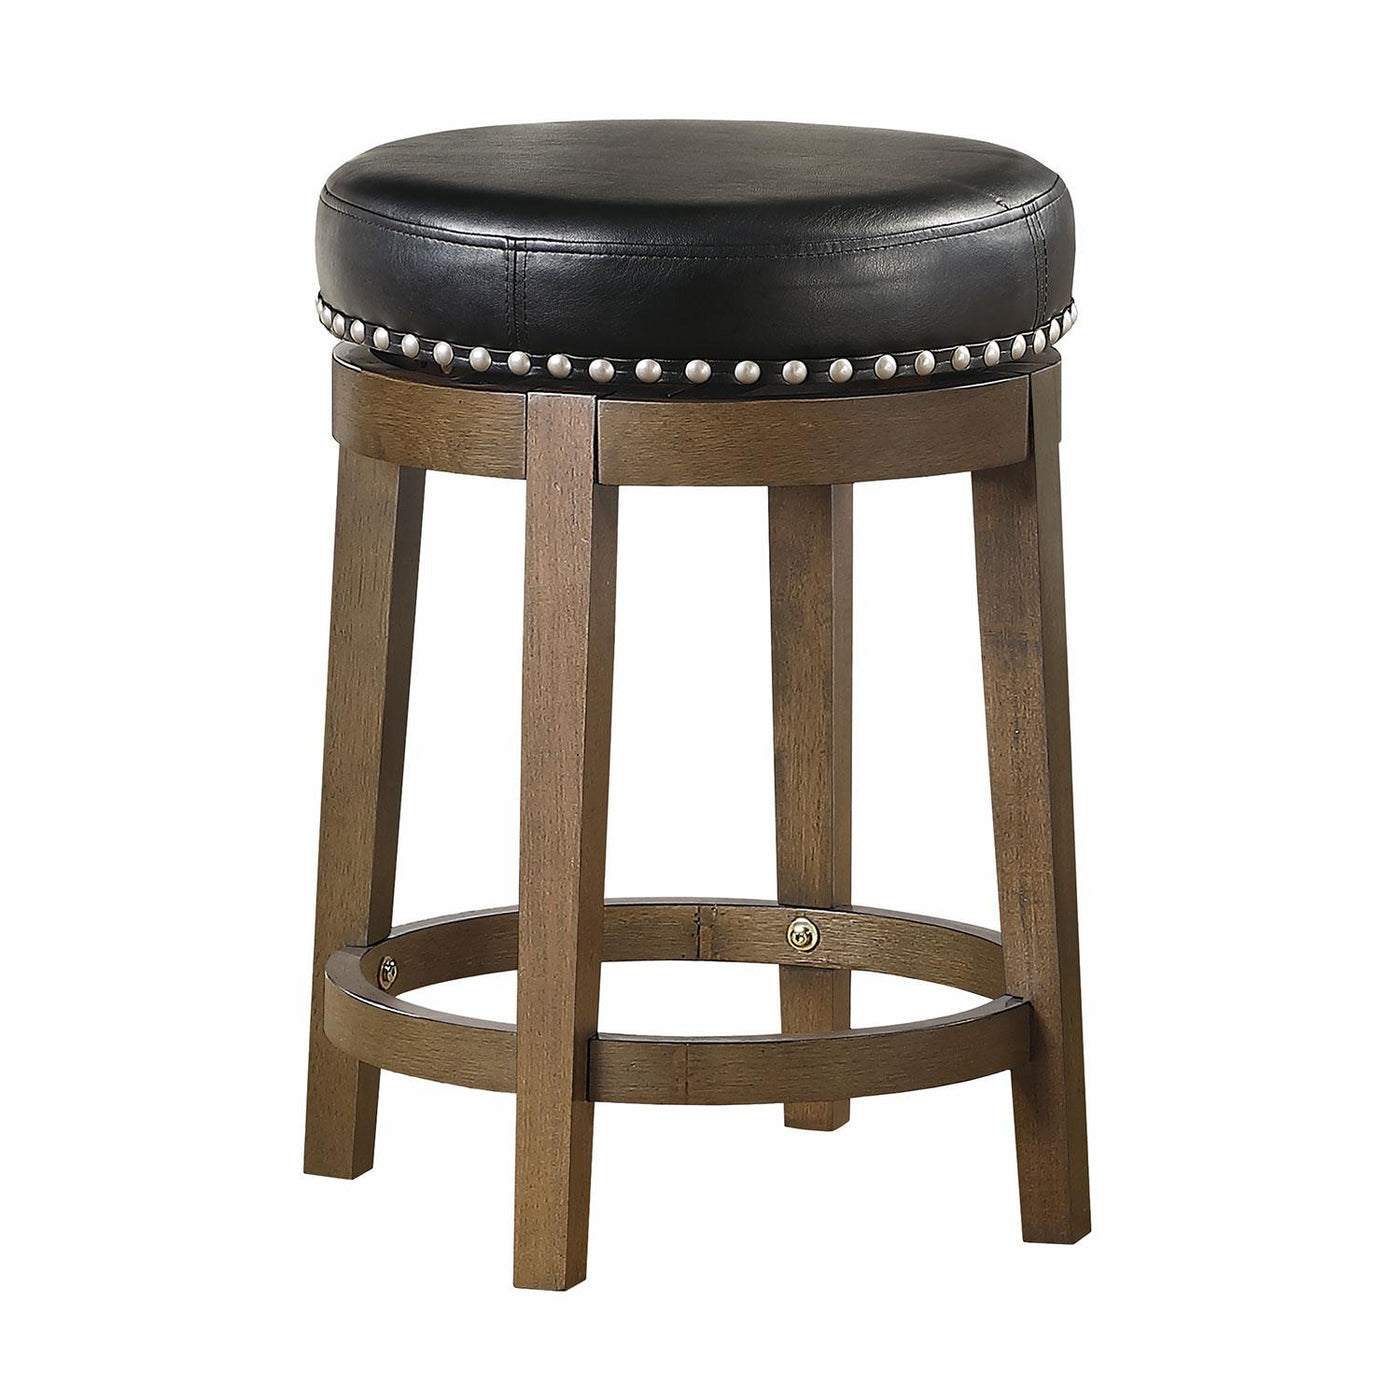 Westby Round Swivel Counter Height Stool - Black